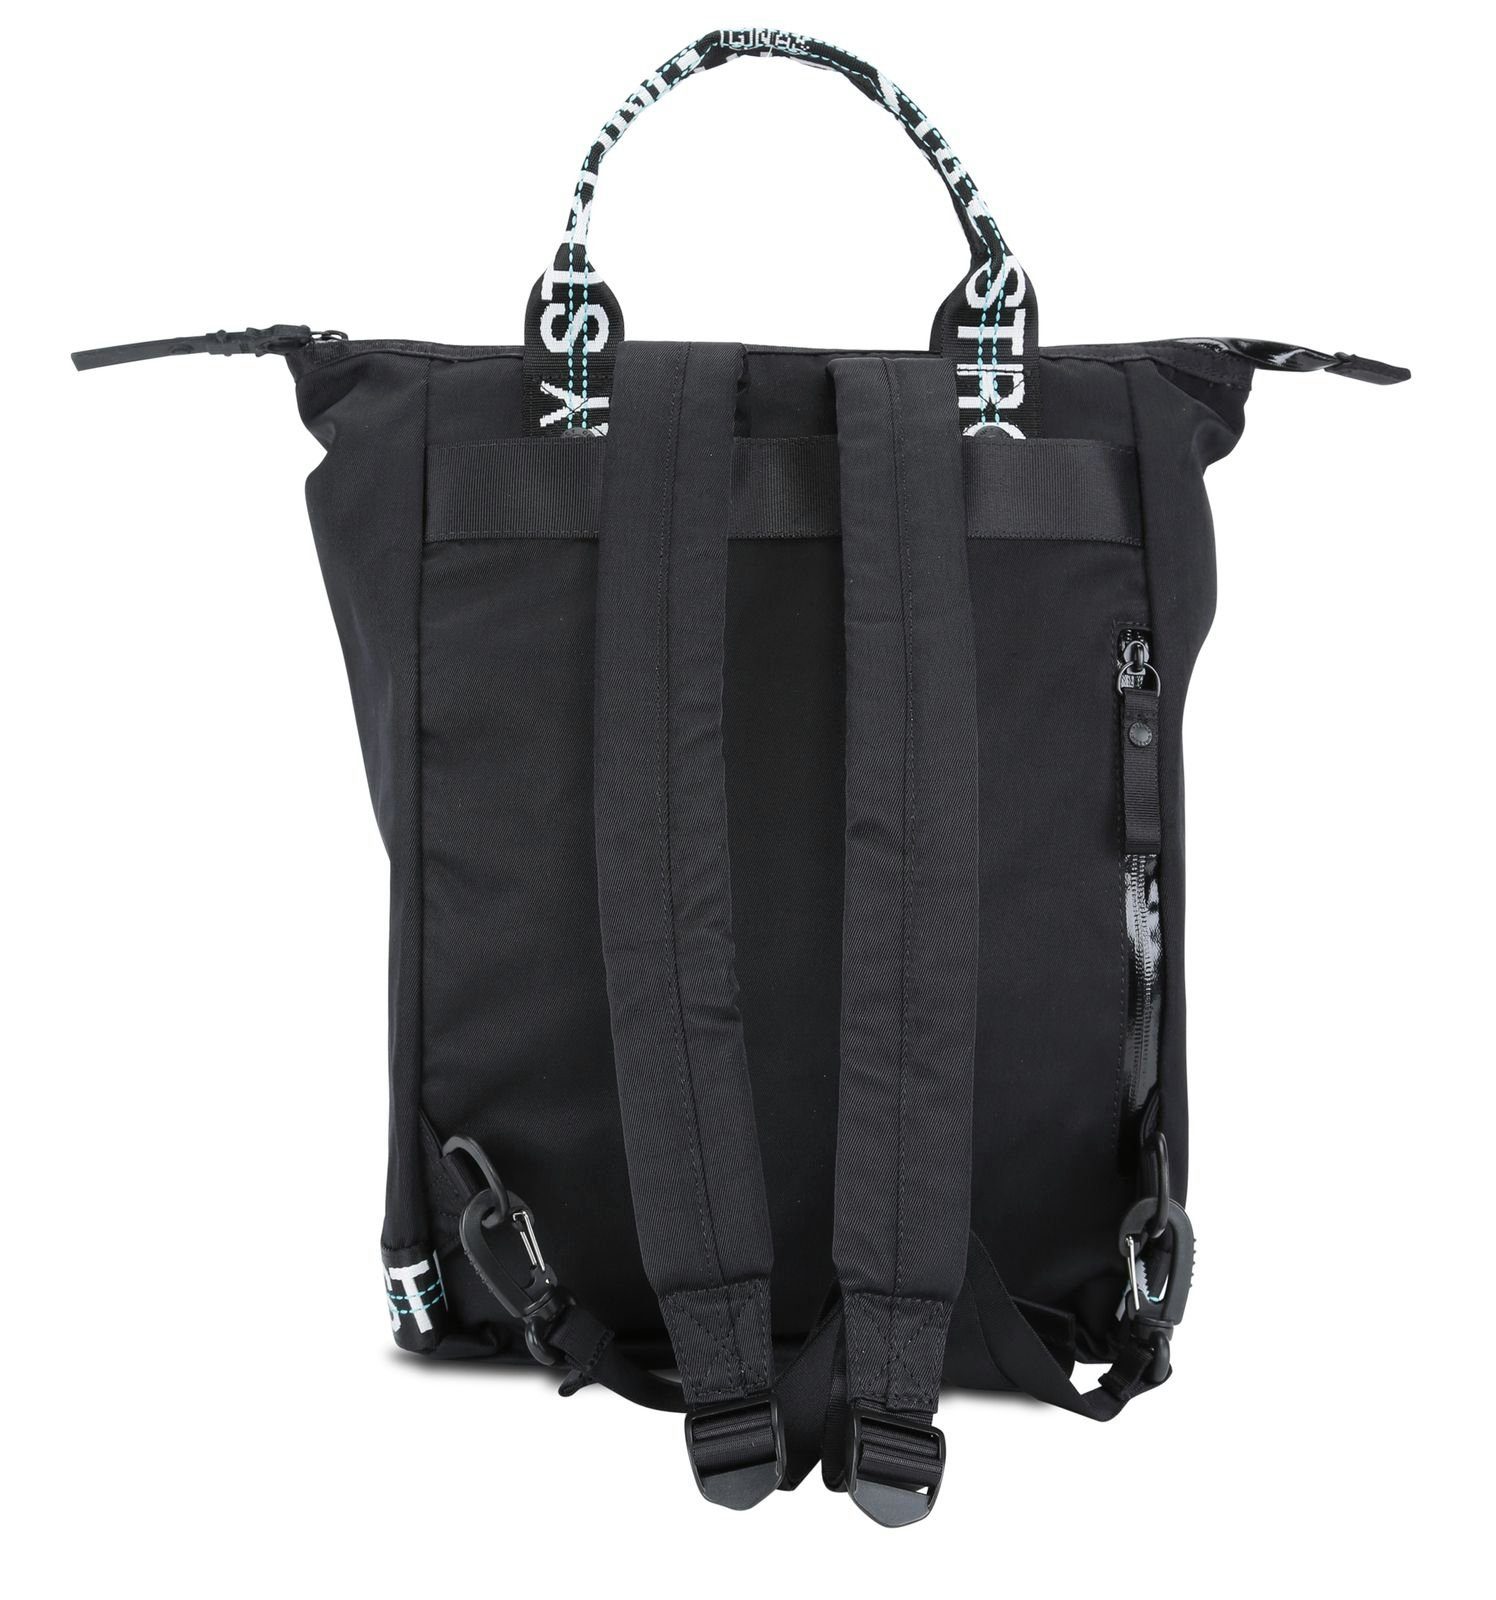 Lucy Gina Rucksack Roots & George Strong Nylon Black